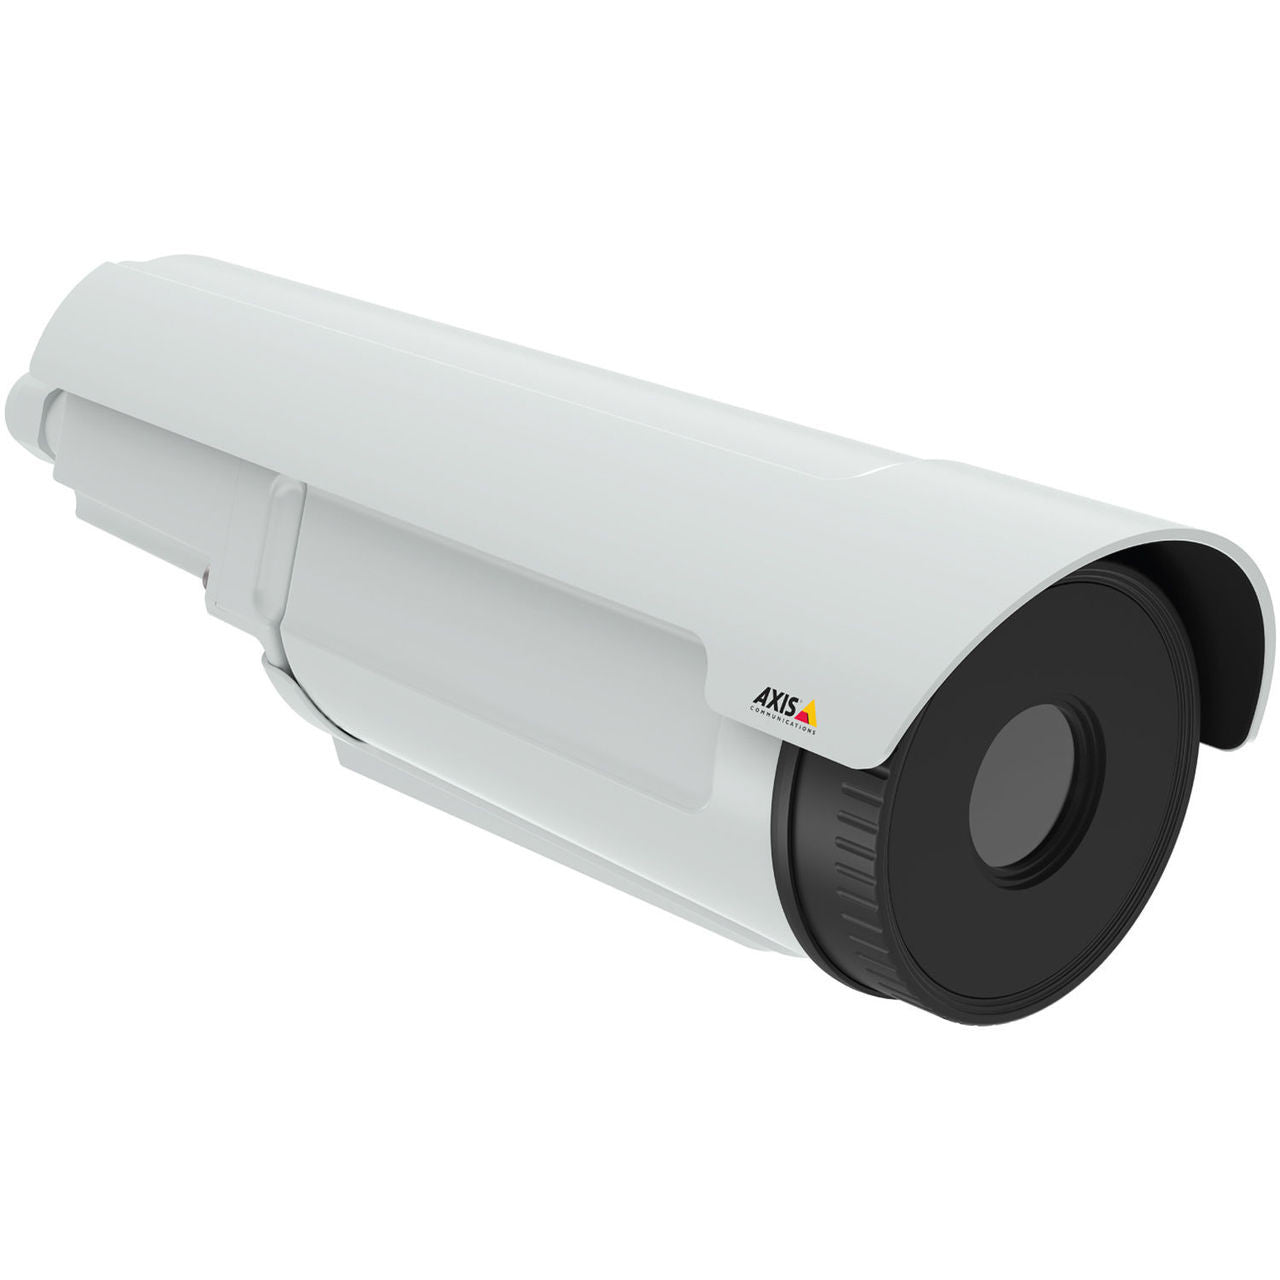 AXIS Q2901-E PT Mount (0648-001) 19mm 8.3fps Thermal Network Camera